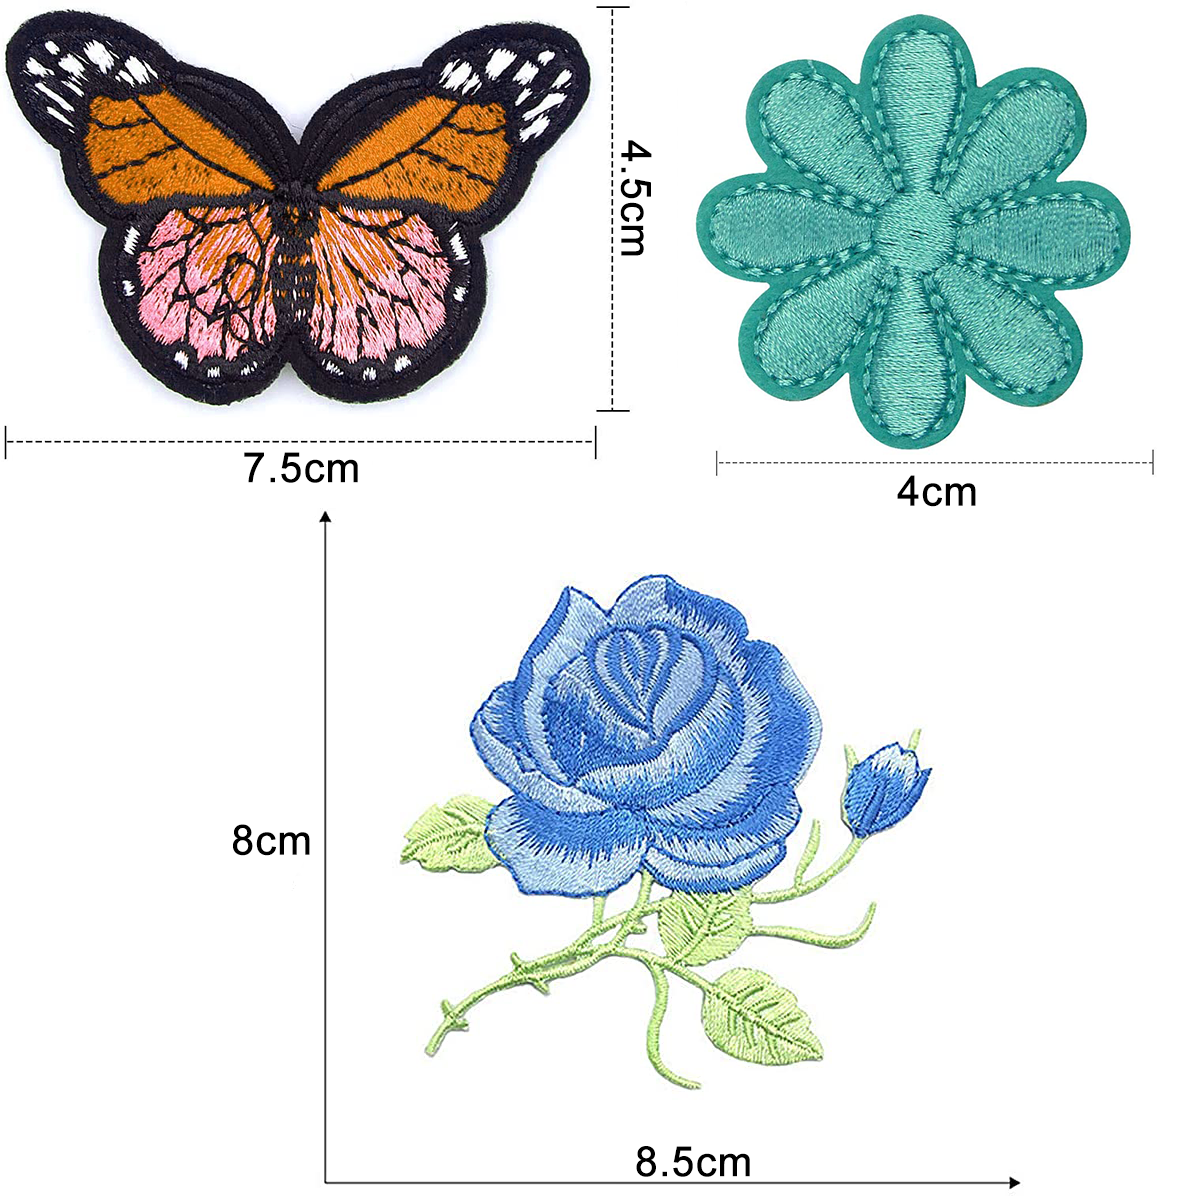 Butterfly Flower Patch, Large Ladies Back Patches for Jackets by Ivamis  Patches